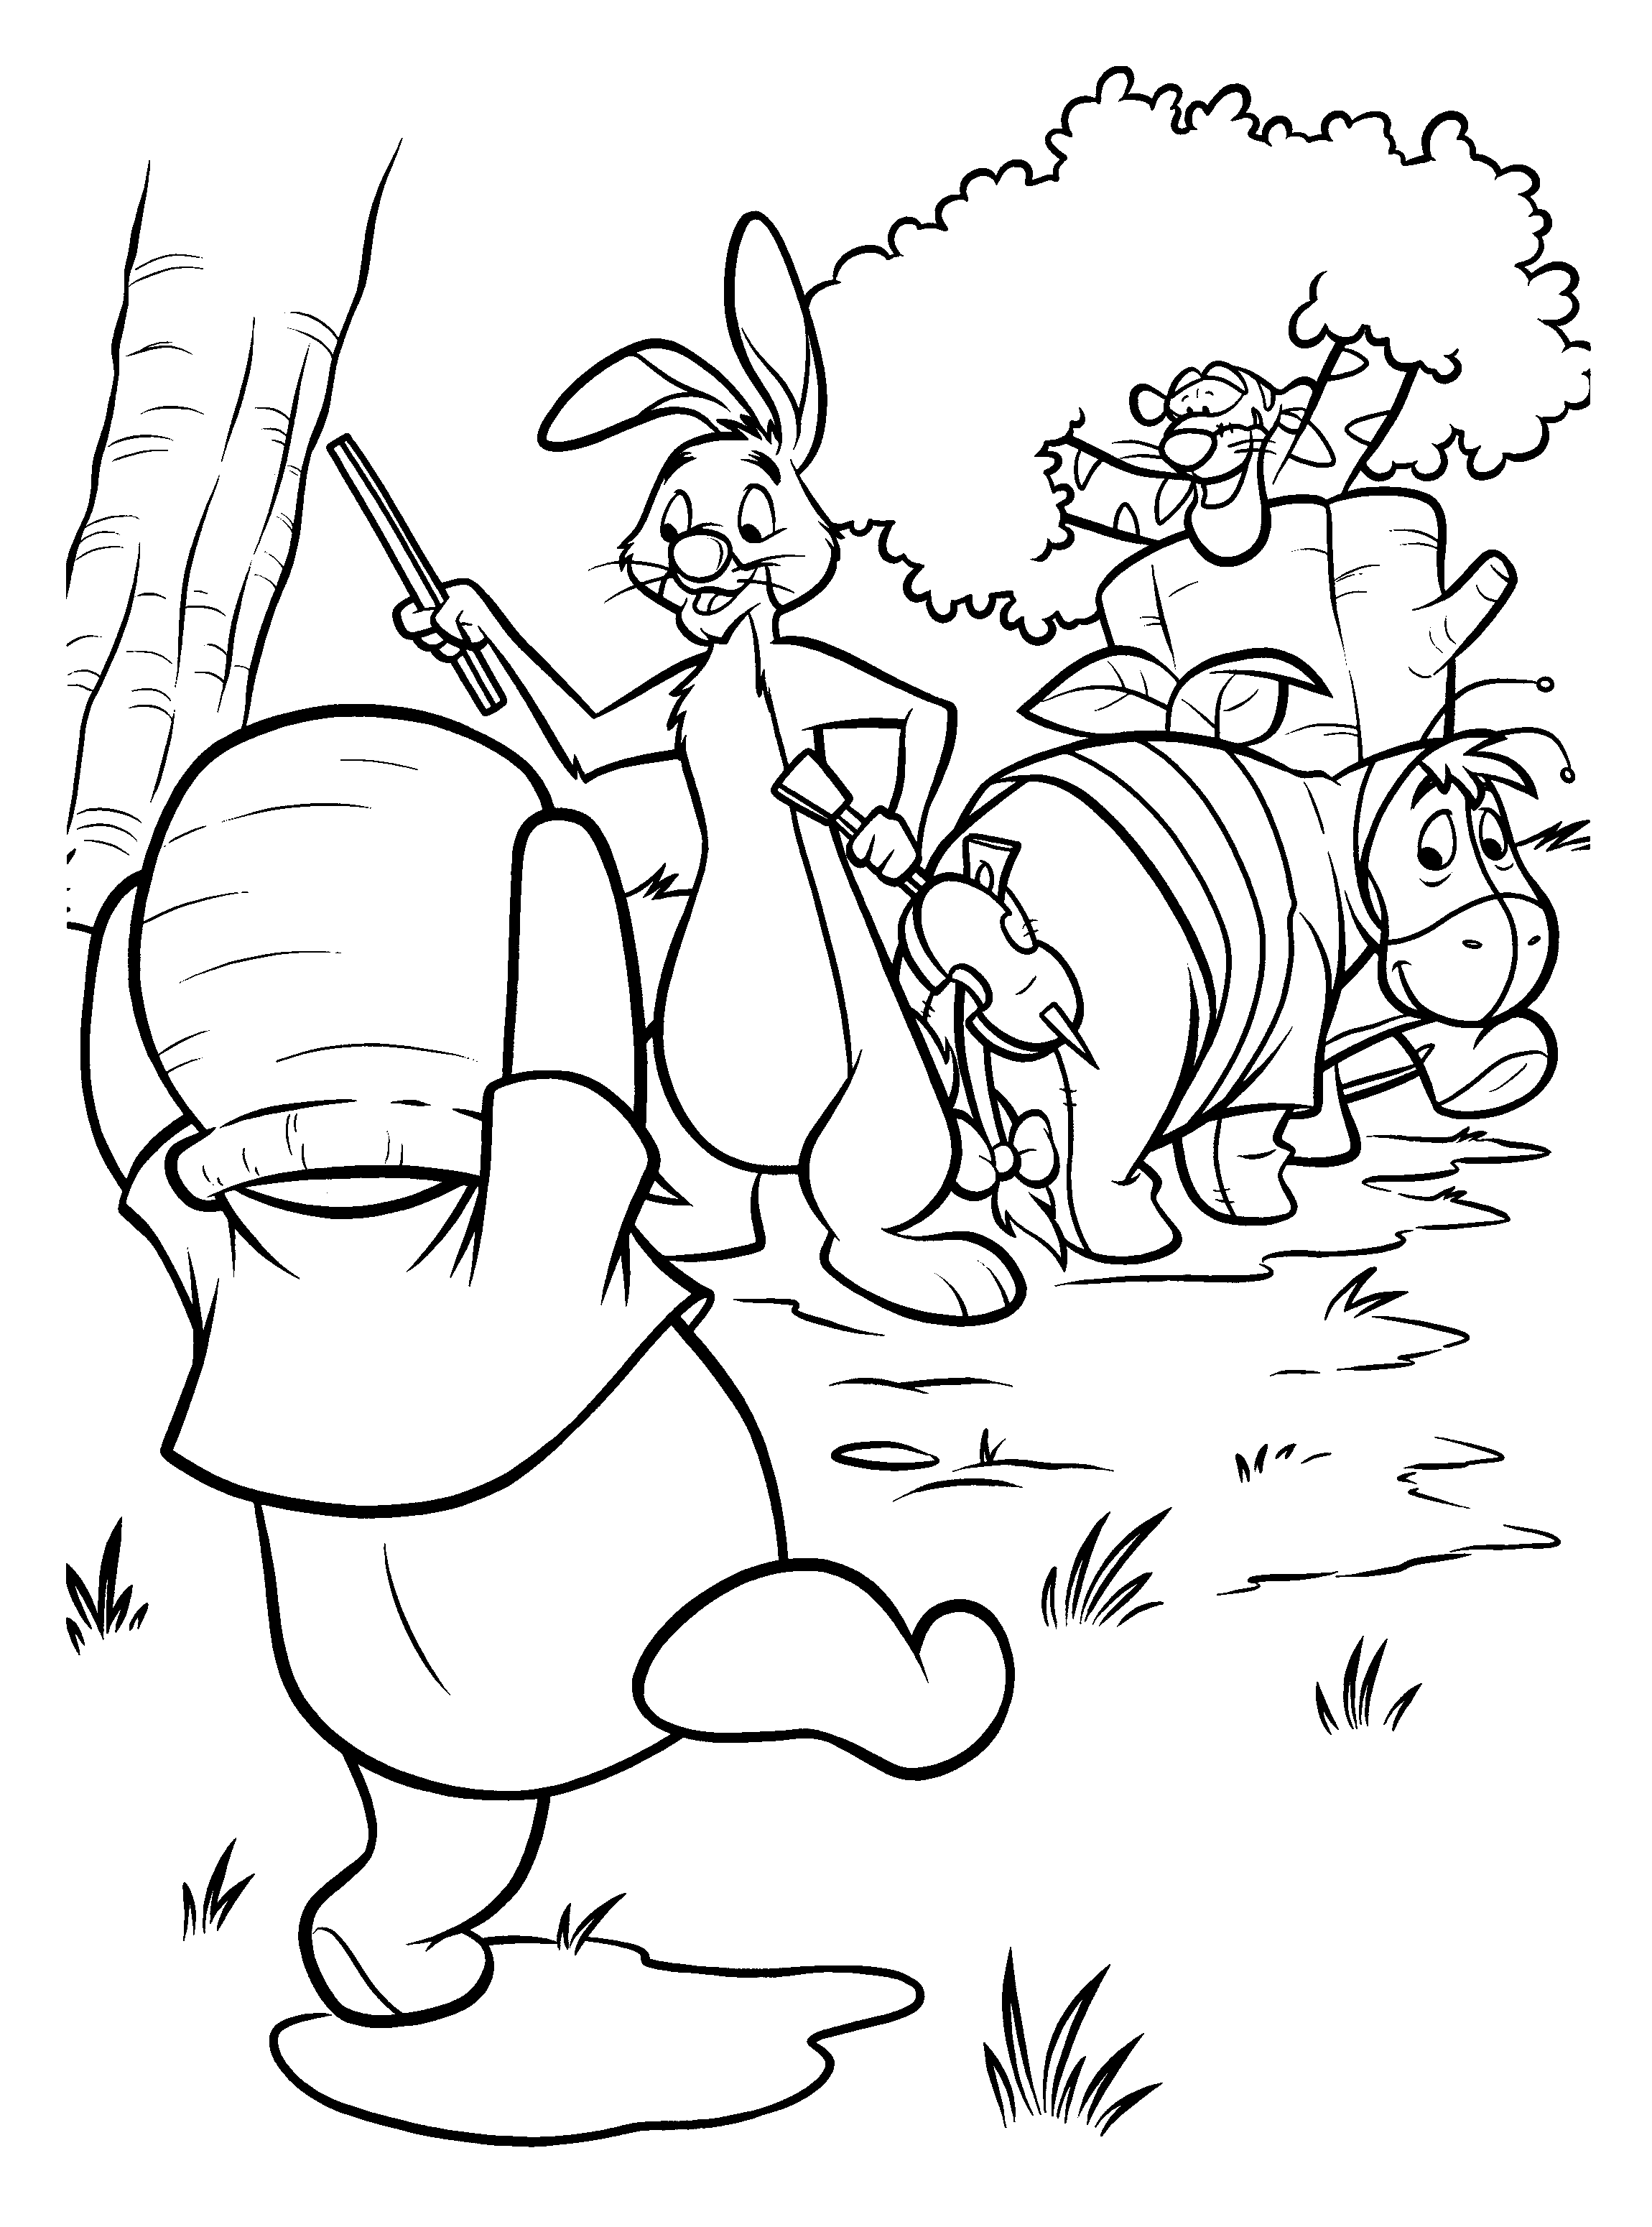 coloring-page-winnie-the-pooh-coloring-pages-2